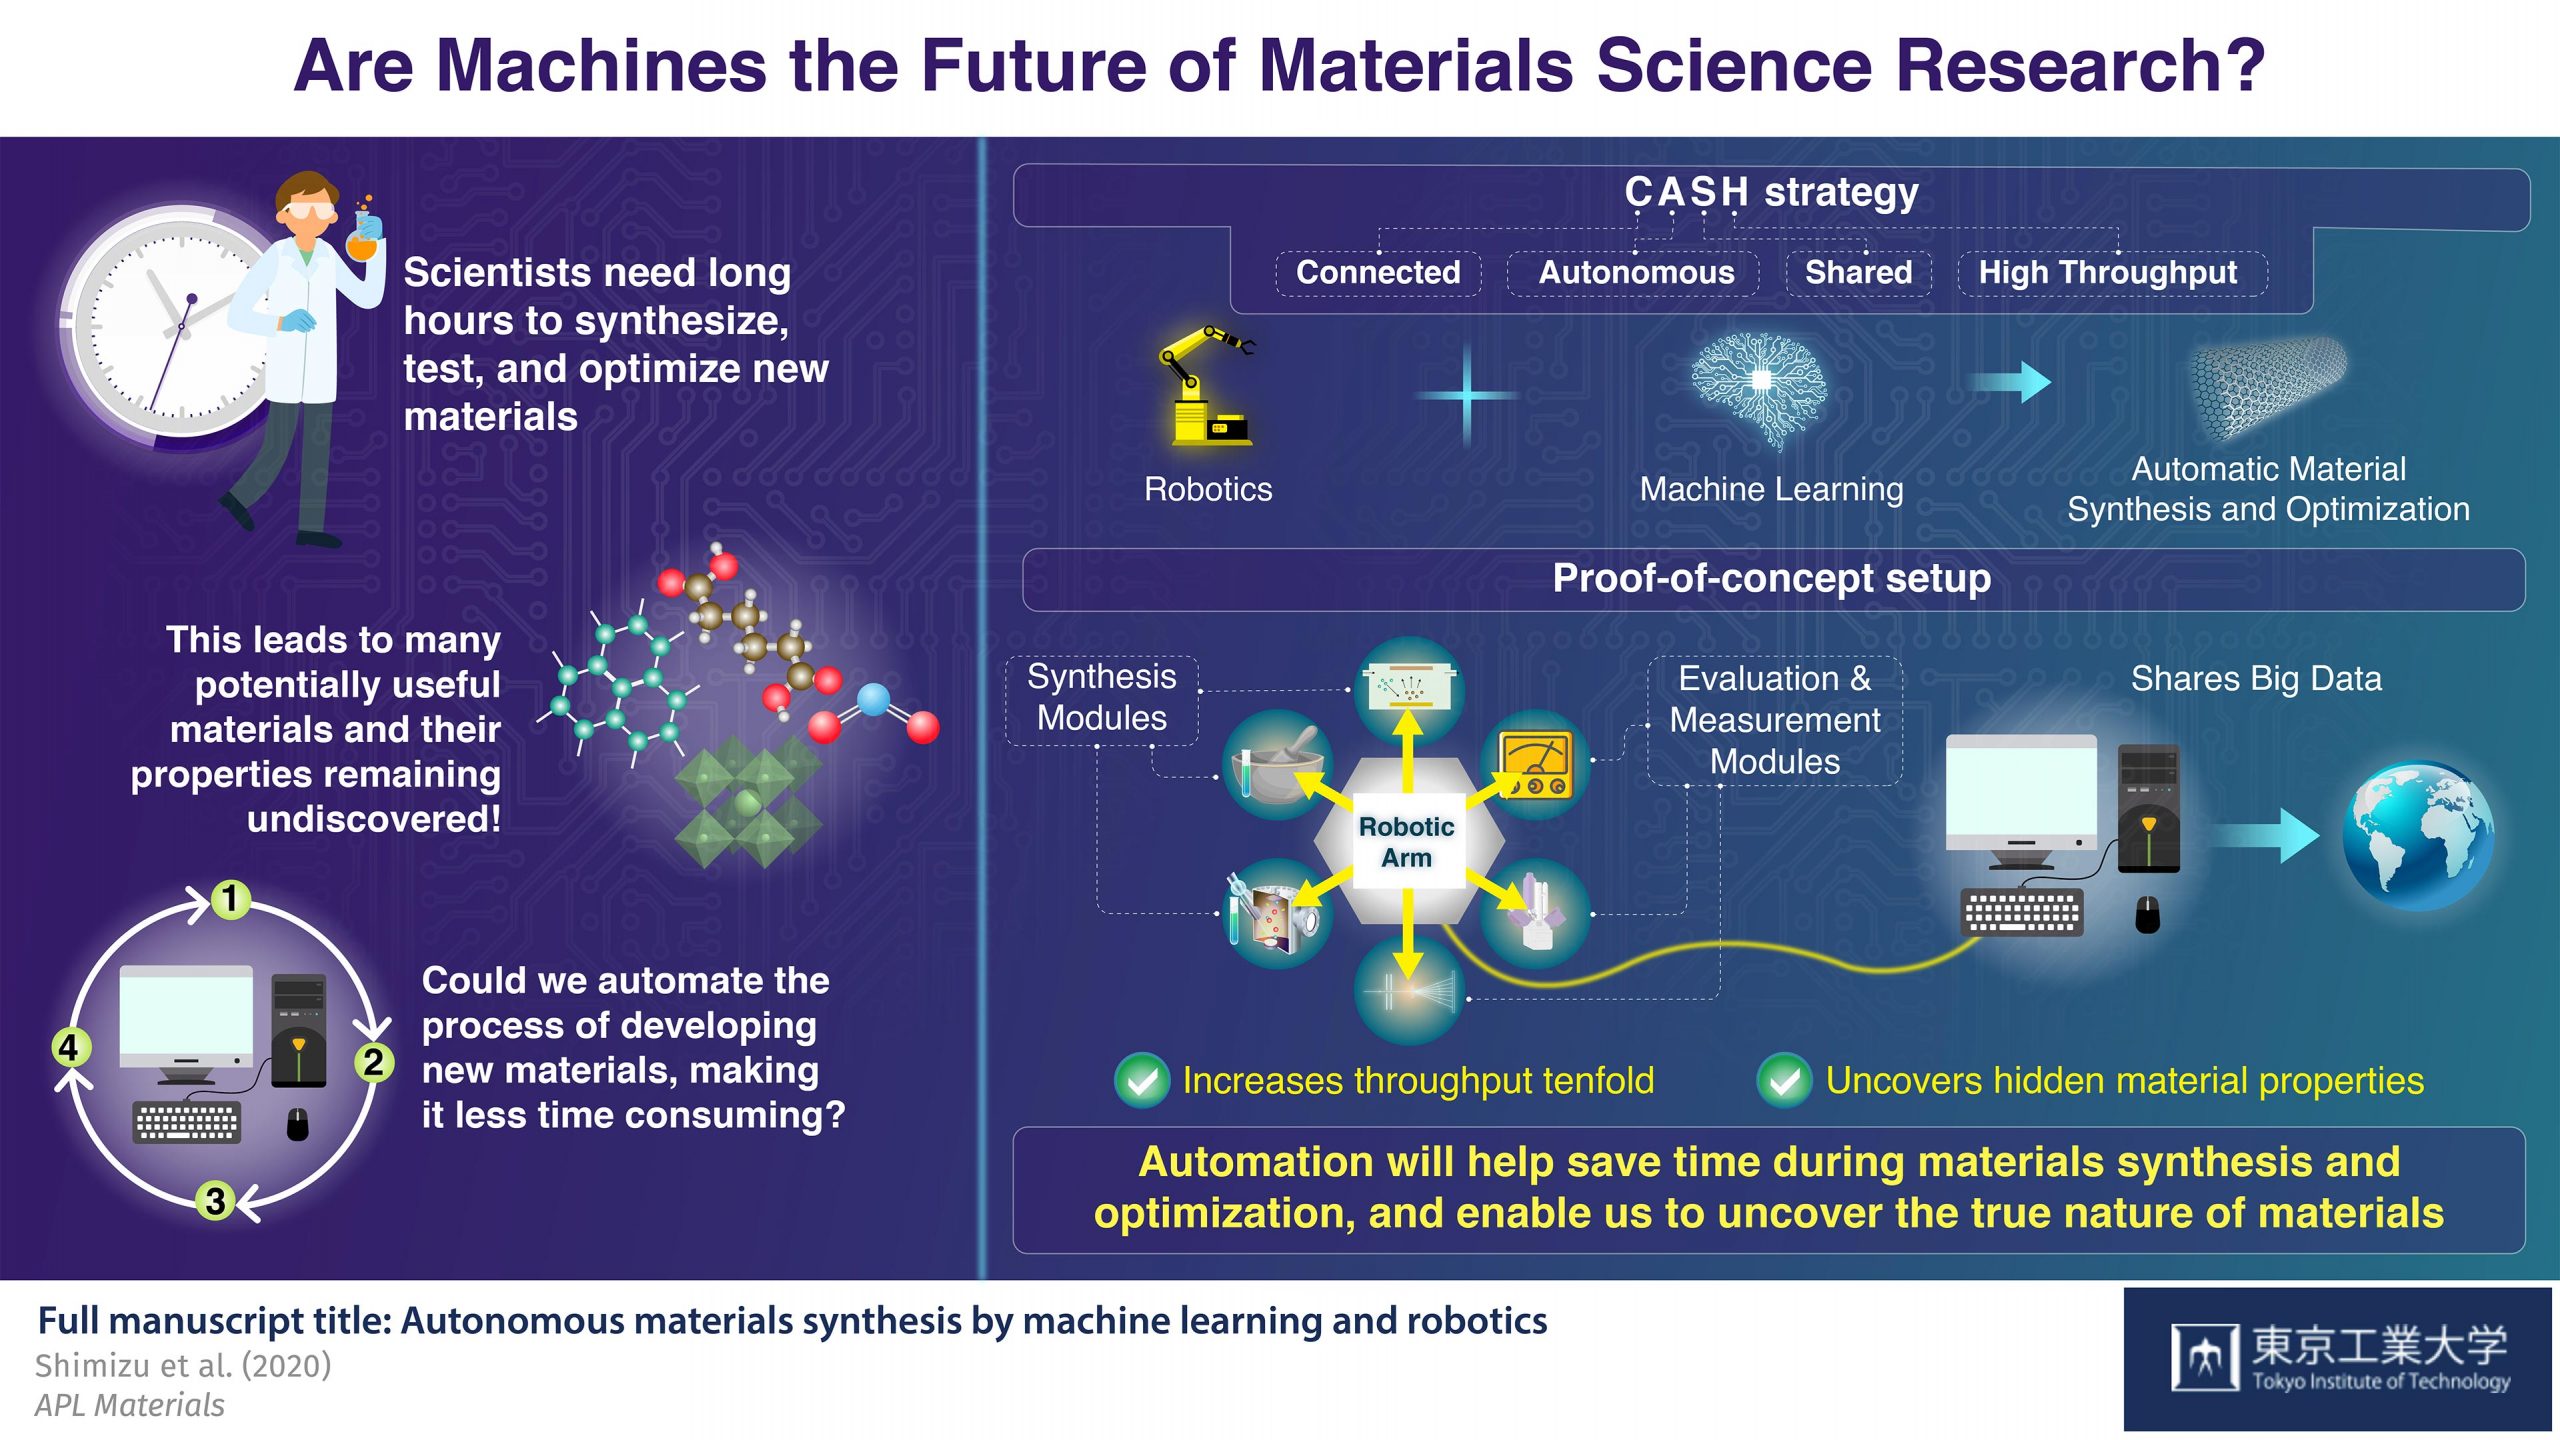 cash-using-automation-to-revolutionize-materials-research